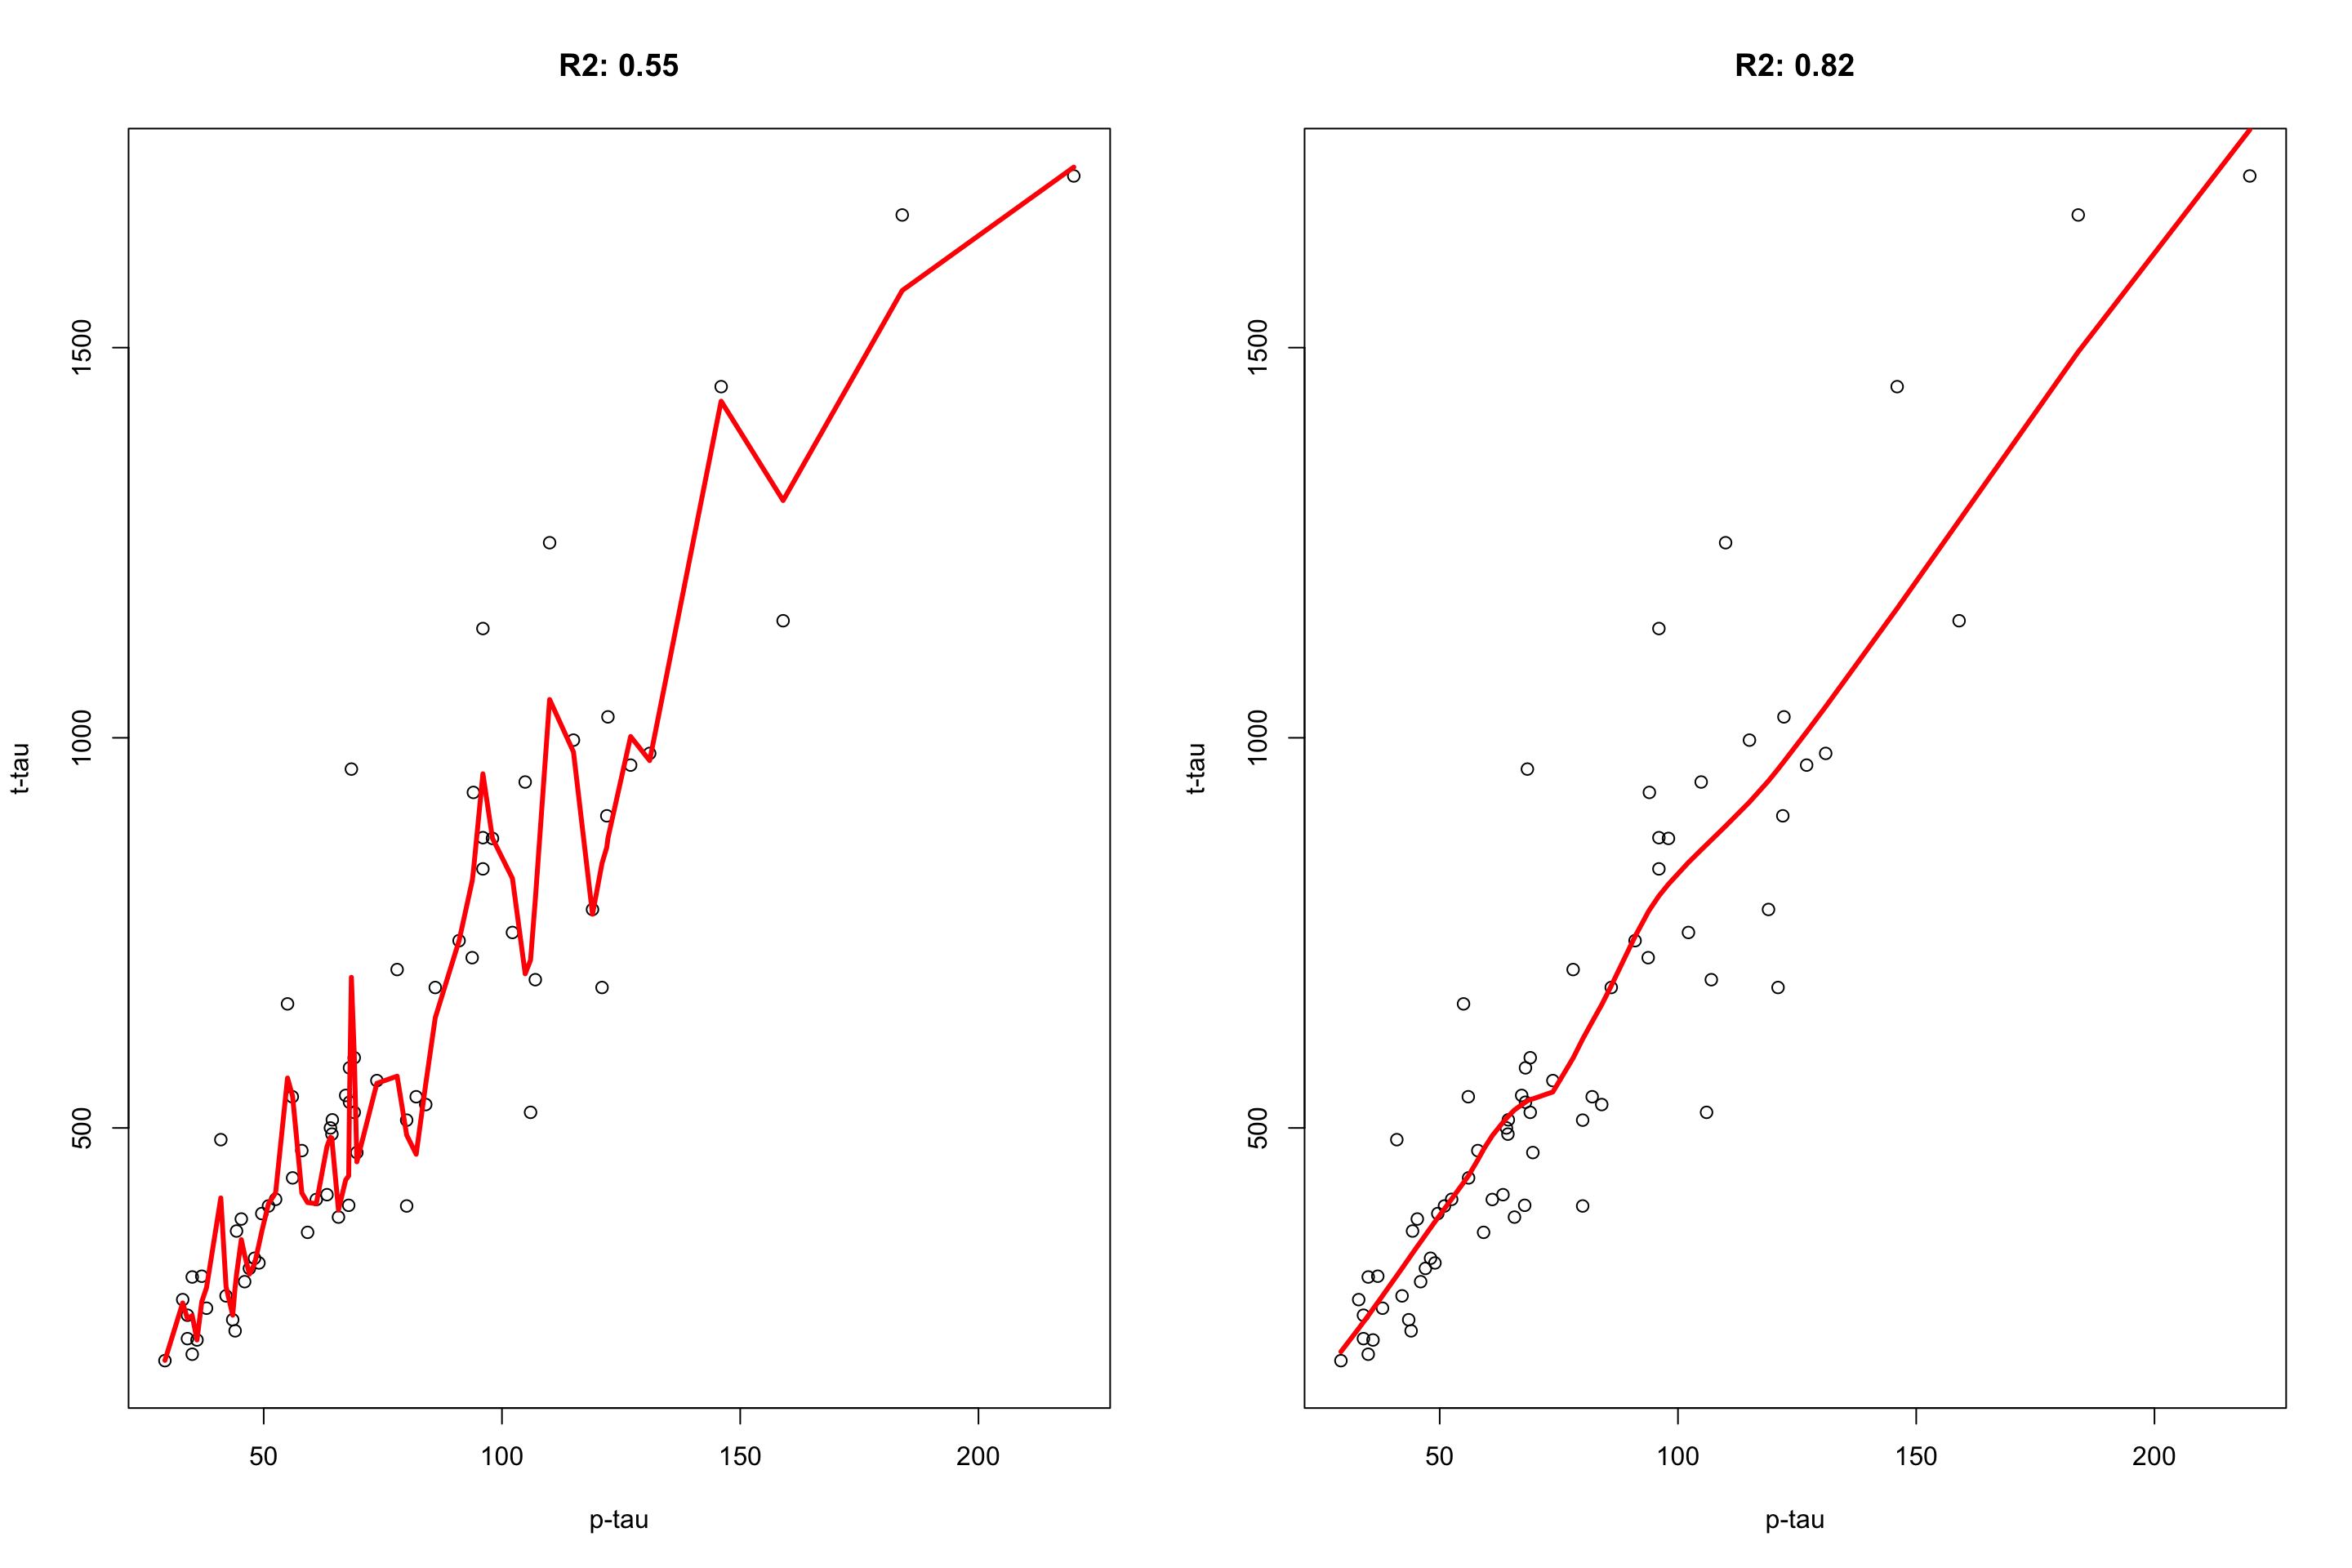 plot of p-tau vs t-tau using two models. The model on the left has span of 0.1 and the model on the right has the span of 0.6.